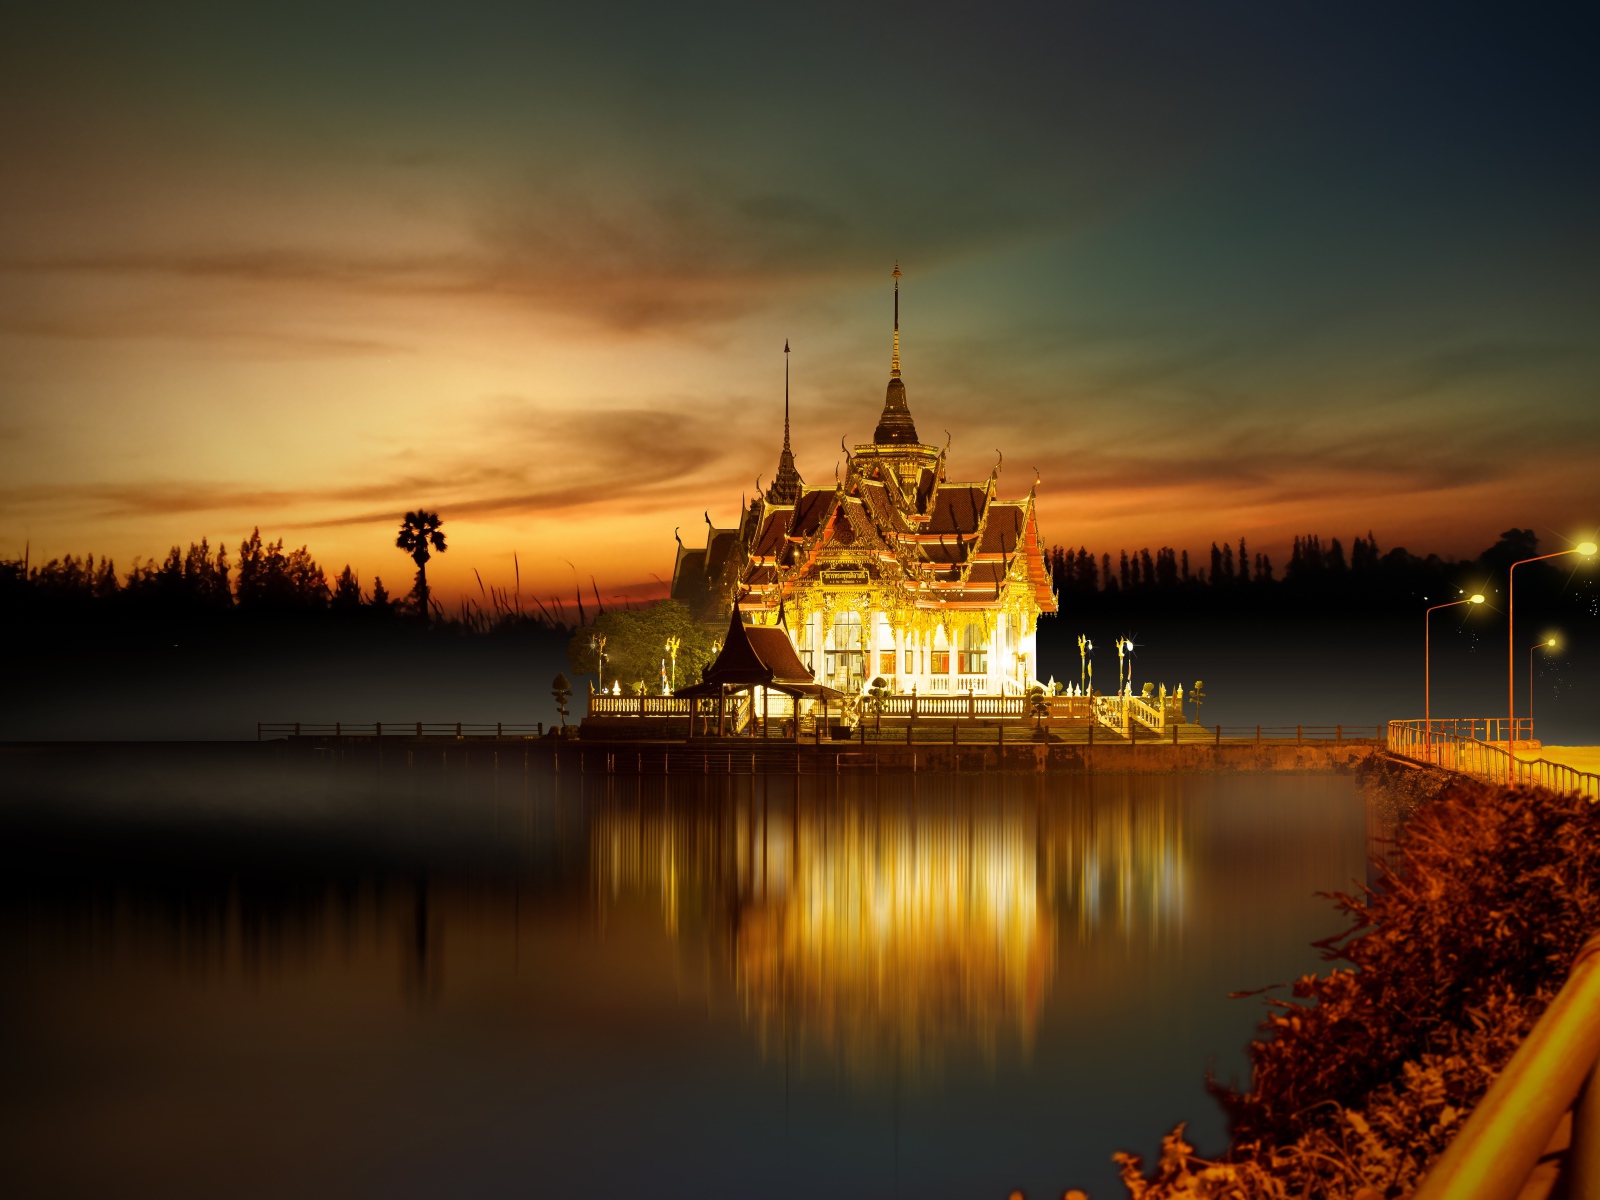 Buddhist temple by the water at night, Asia